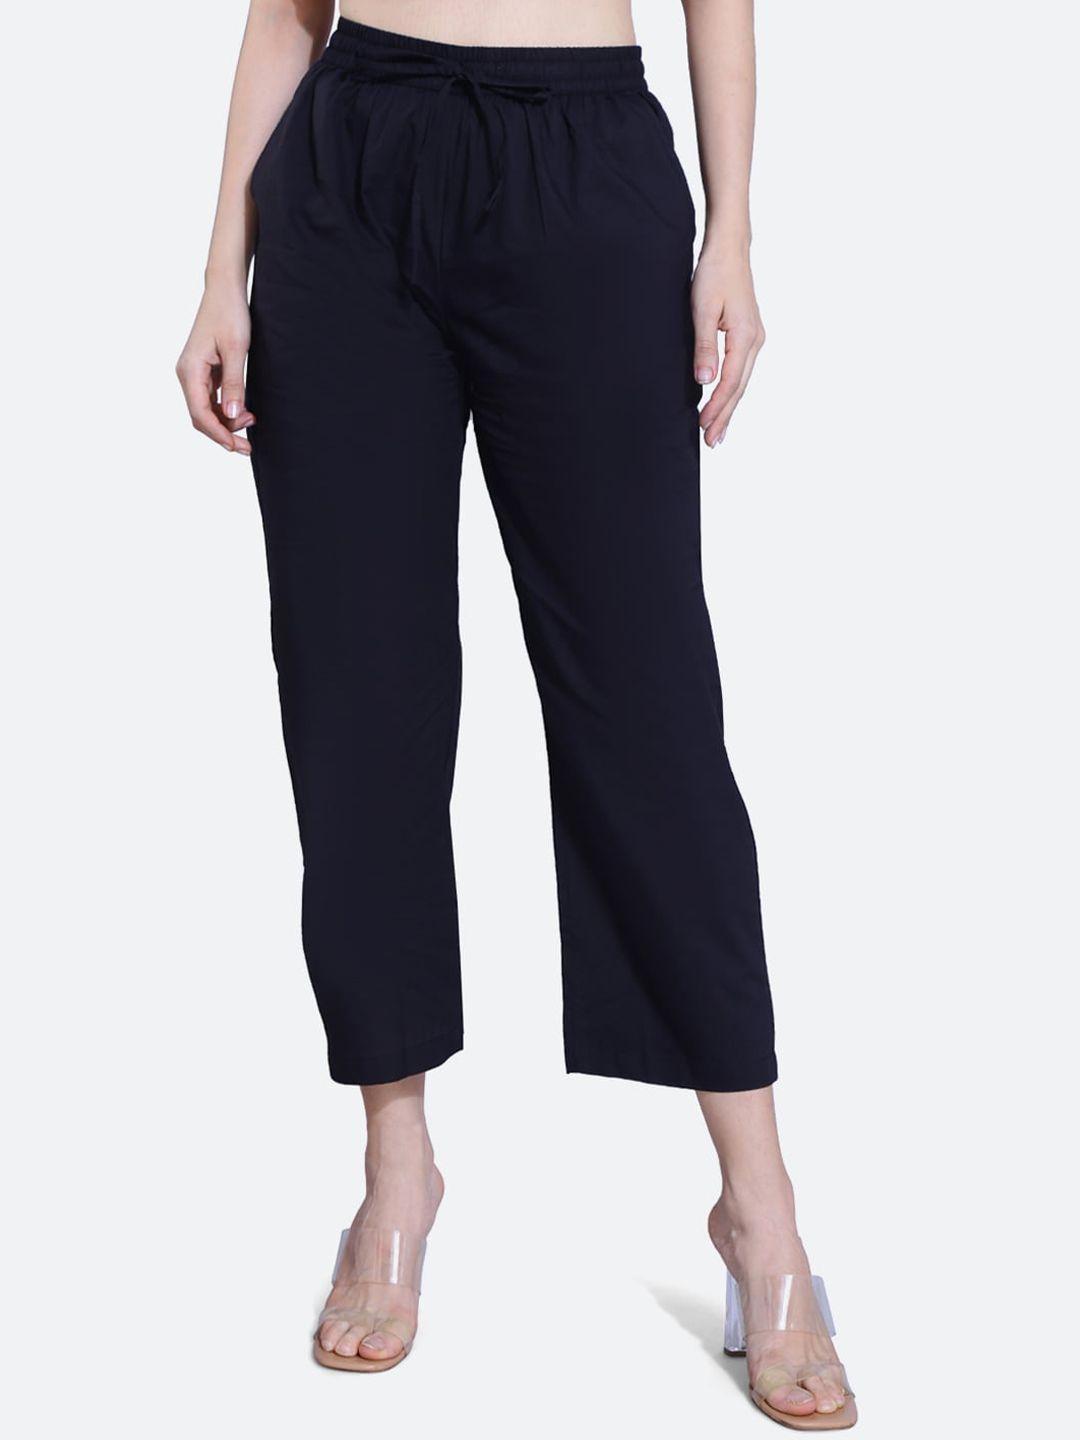 fck-3 women black relaxed high-rise easy wash culottes trousers